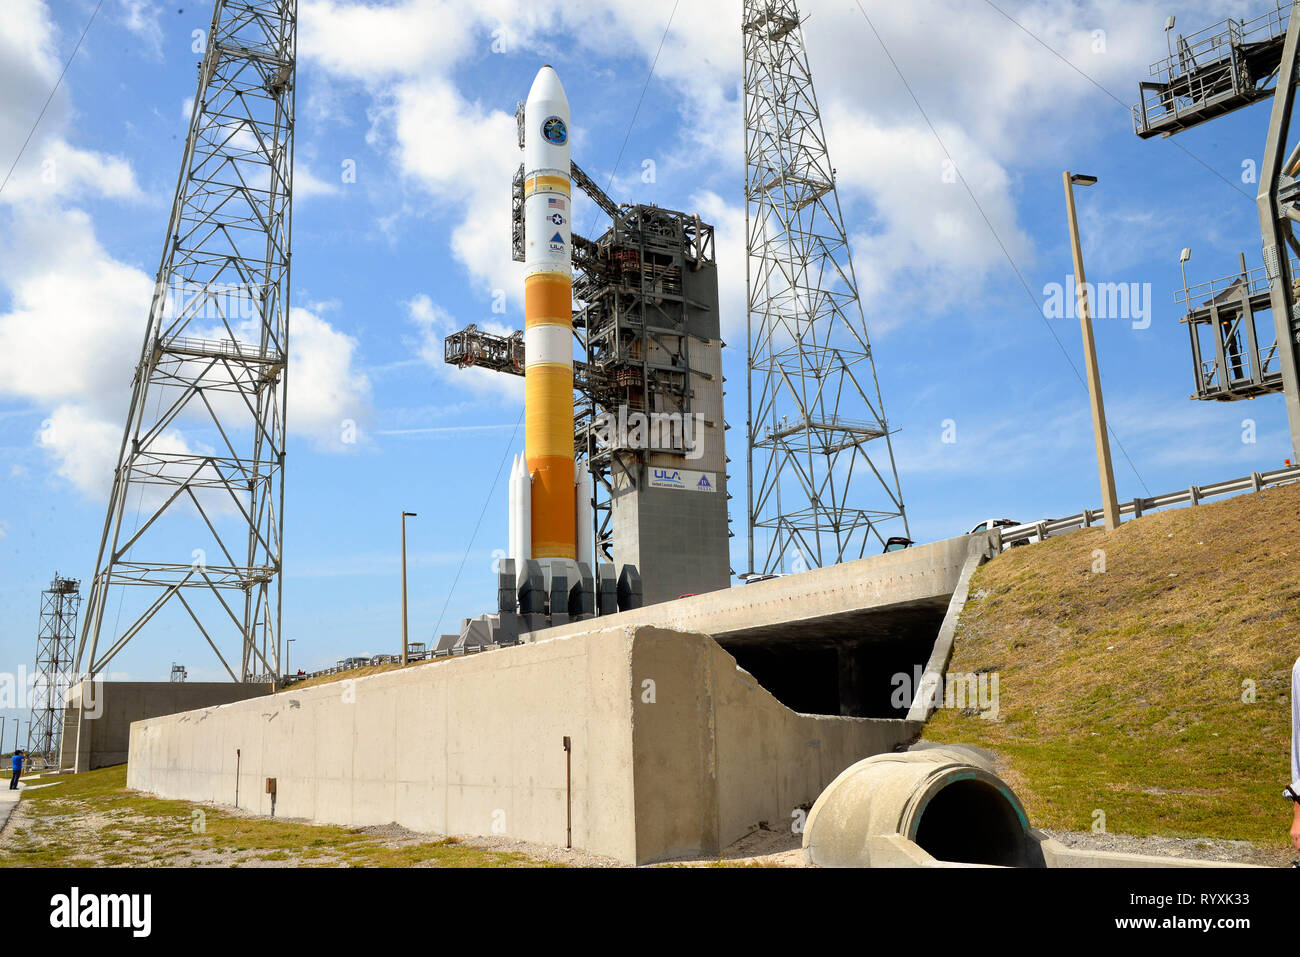 Cape Canaveral Air Force Station. Florida. USA. 15th March, 2019. The ULA Launch Readiness Review has been completed today and everything is progressing toward the ULA Delta IV launch carrying the WGS-10 mission for the U.S. Air Force. The mission is set to lift off on Friday, March 15 from Space Launch Complex-37 at Cape Canaveral Air Force Station in Florida. Today’s forecast shows an 80 percent chance of favorable weather conditions for launch. The launch window begins at 6:56 p.m. ET and extends to 9:05 p.m. ET. Photo Credit Julian Leek / Alamy Live News Stock Photo